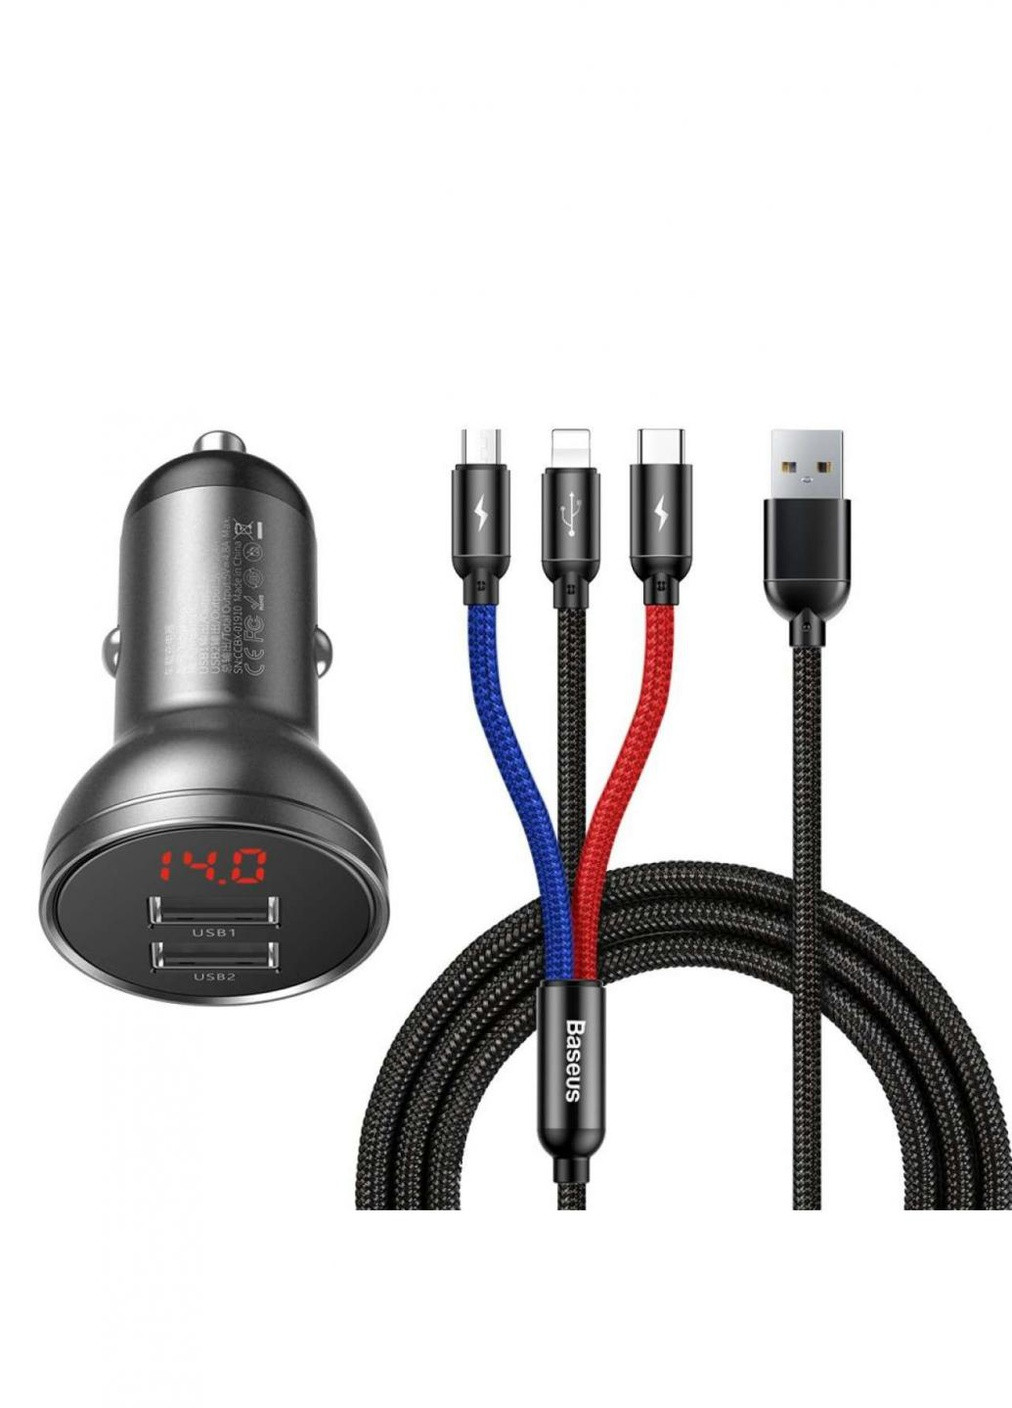 АЗП Digital Display Dual USB 4.8A Car Charger 24W with Three Primary Colors 3-in-1 Cable USB Baseus (259318273)